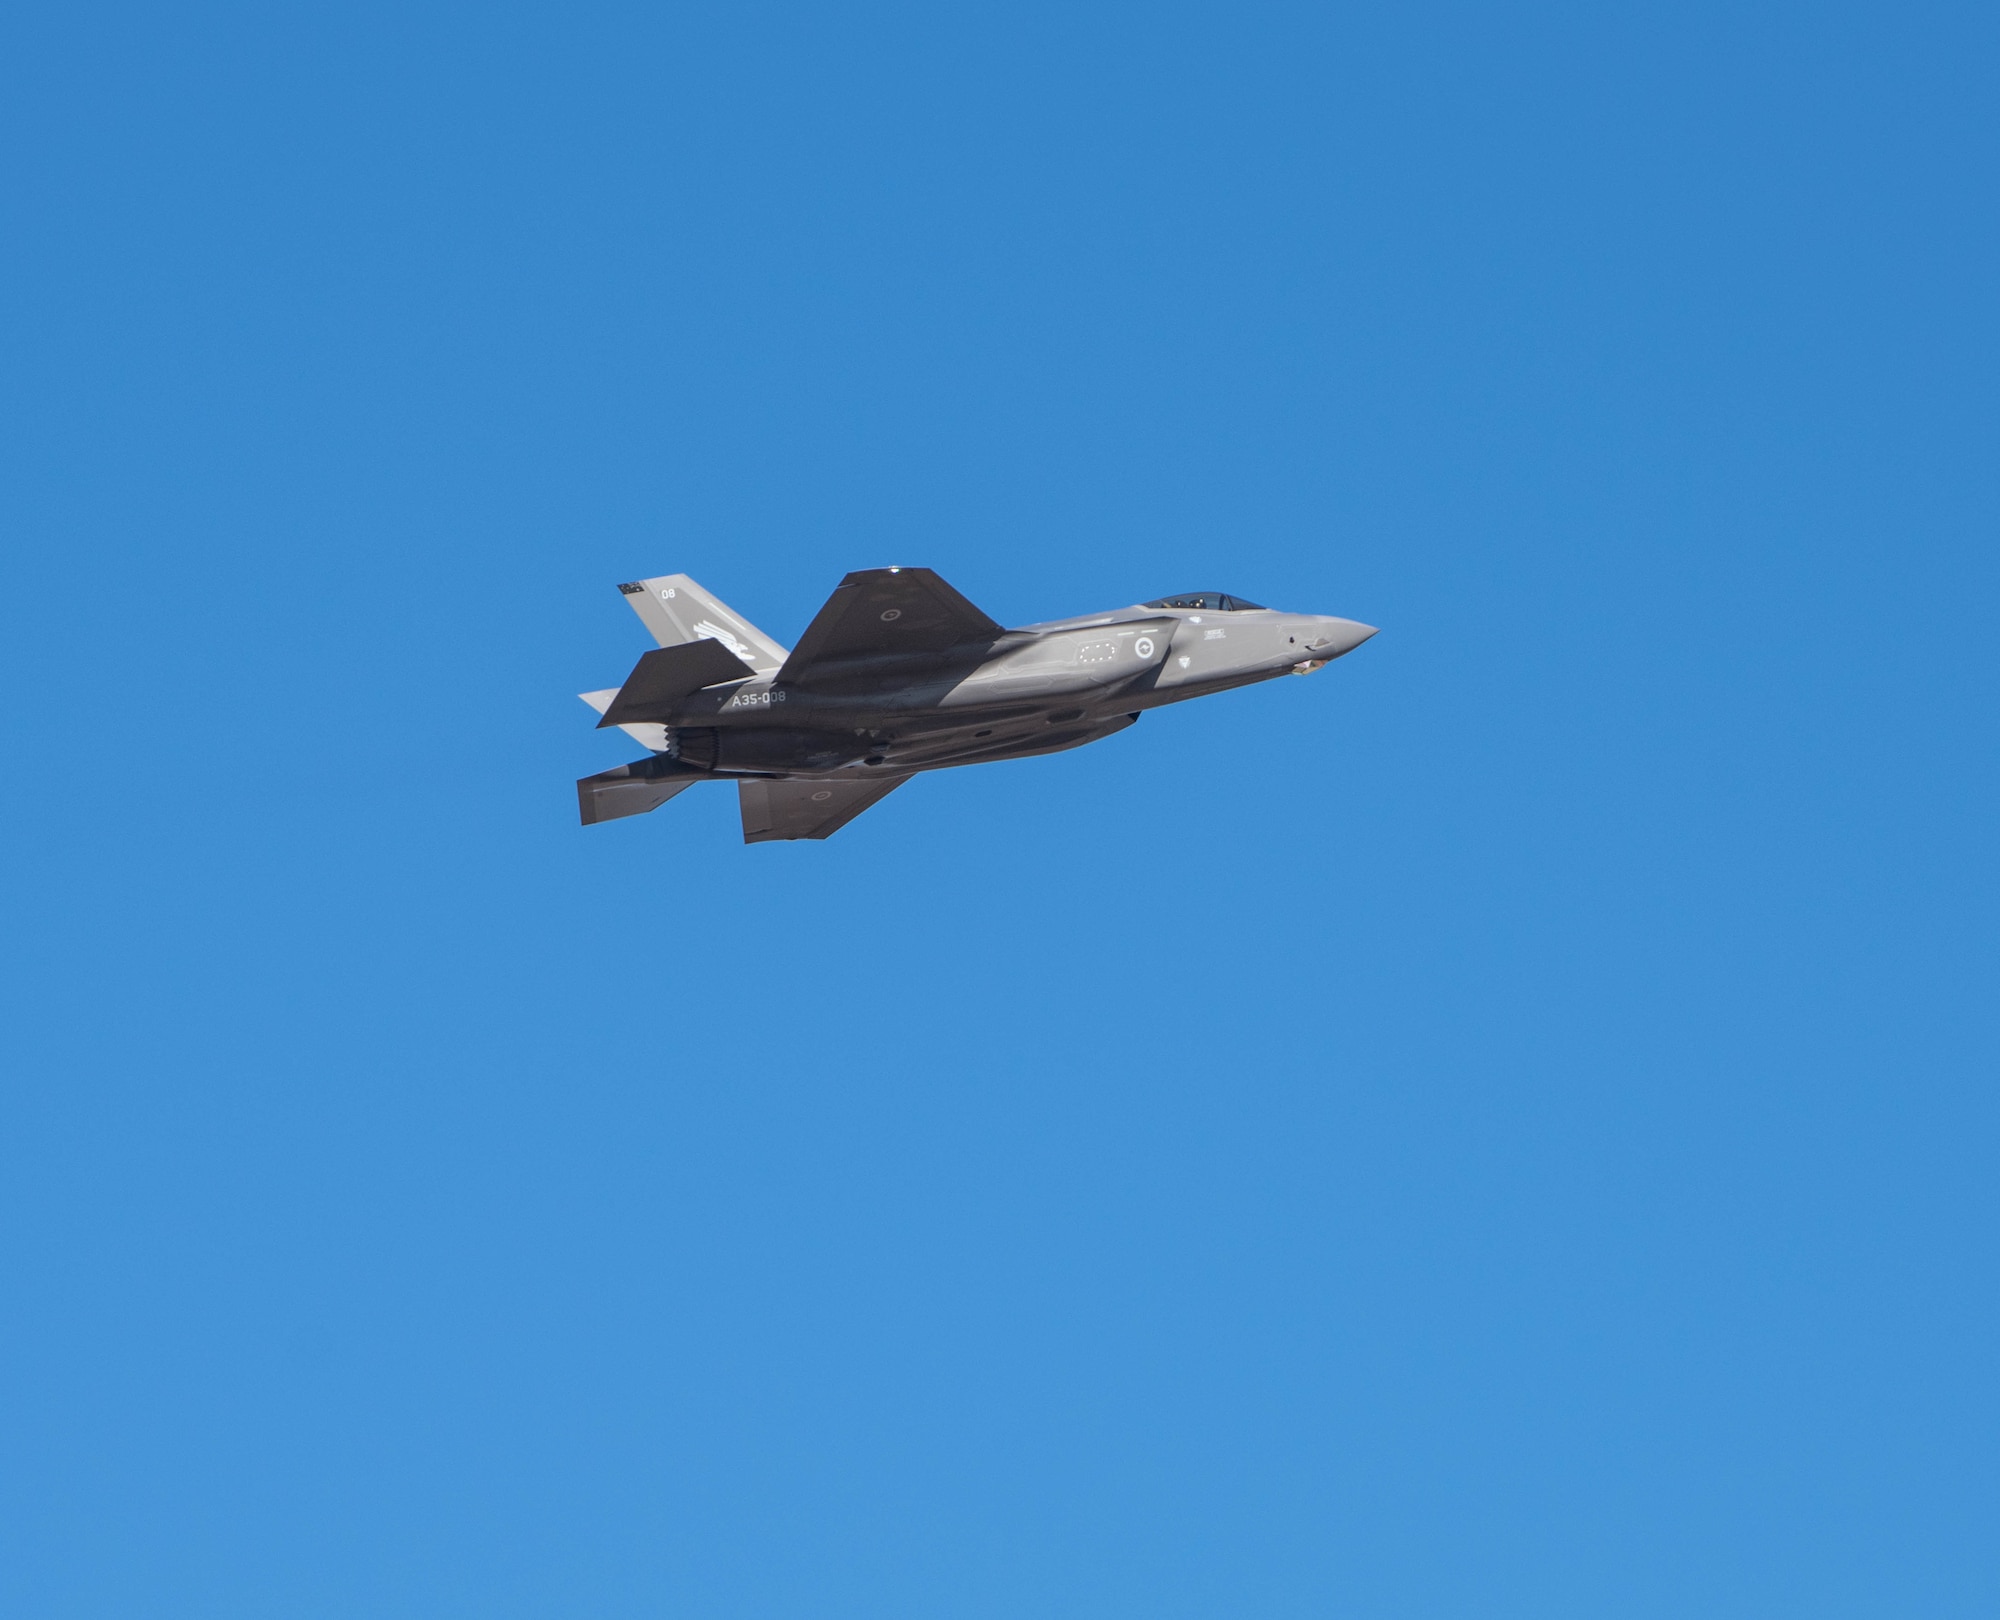 An F-35A Lightning II, assigned to the 61st Fighter Squadron, flies during a sortie Oct. 28, 2019, at Luke Air Force Base, Ariz.